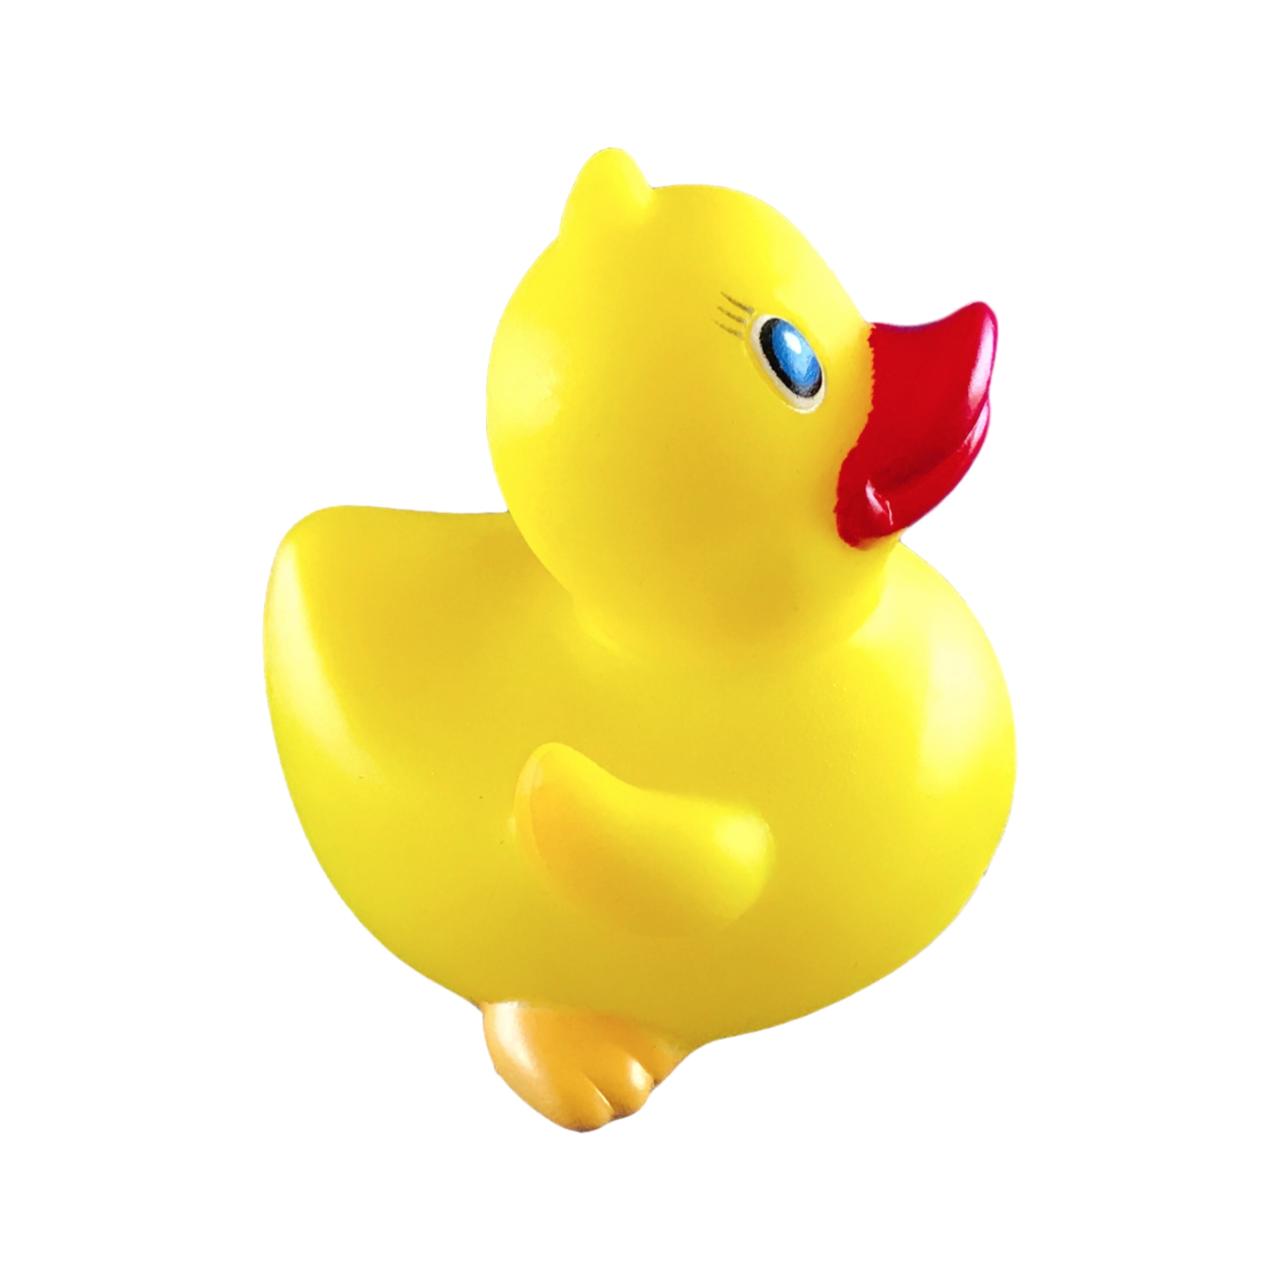 Classic Yellow Rubber Ducky - Custom Rubber Ducks For Sale for $3.50 – DUCKY  CITY